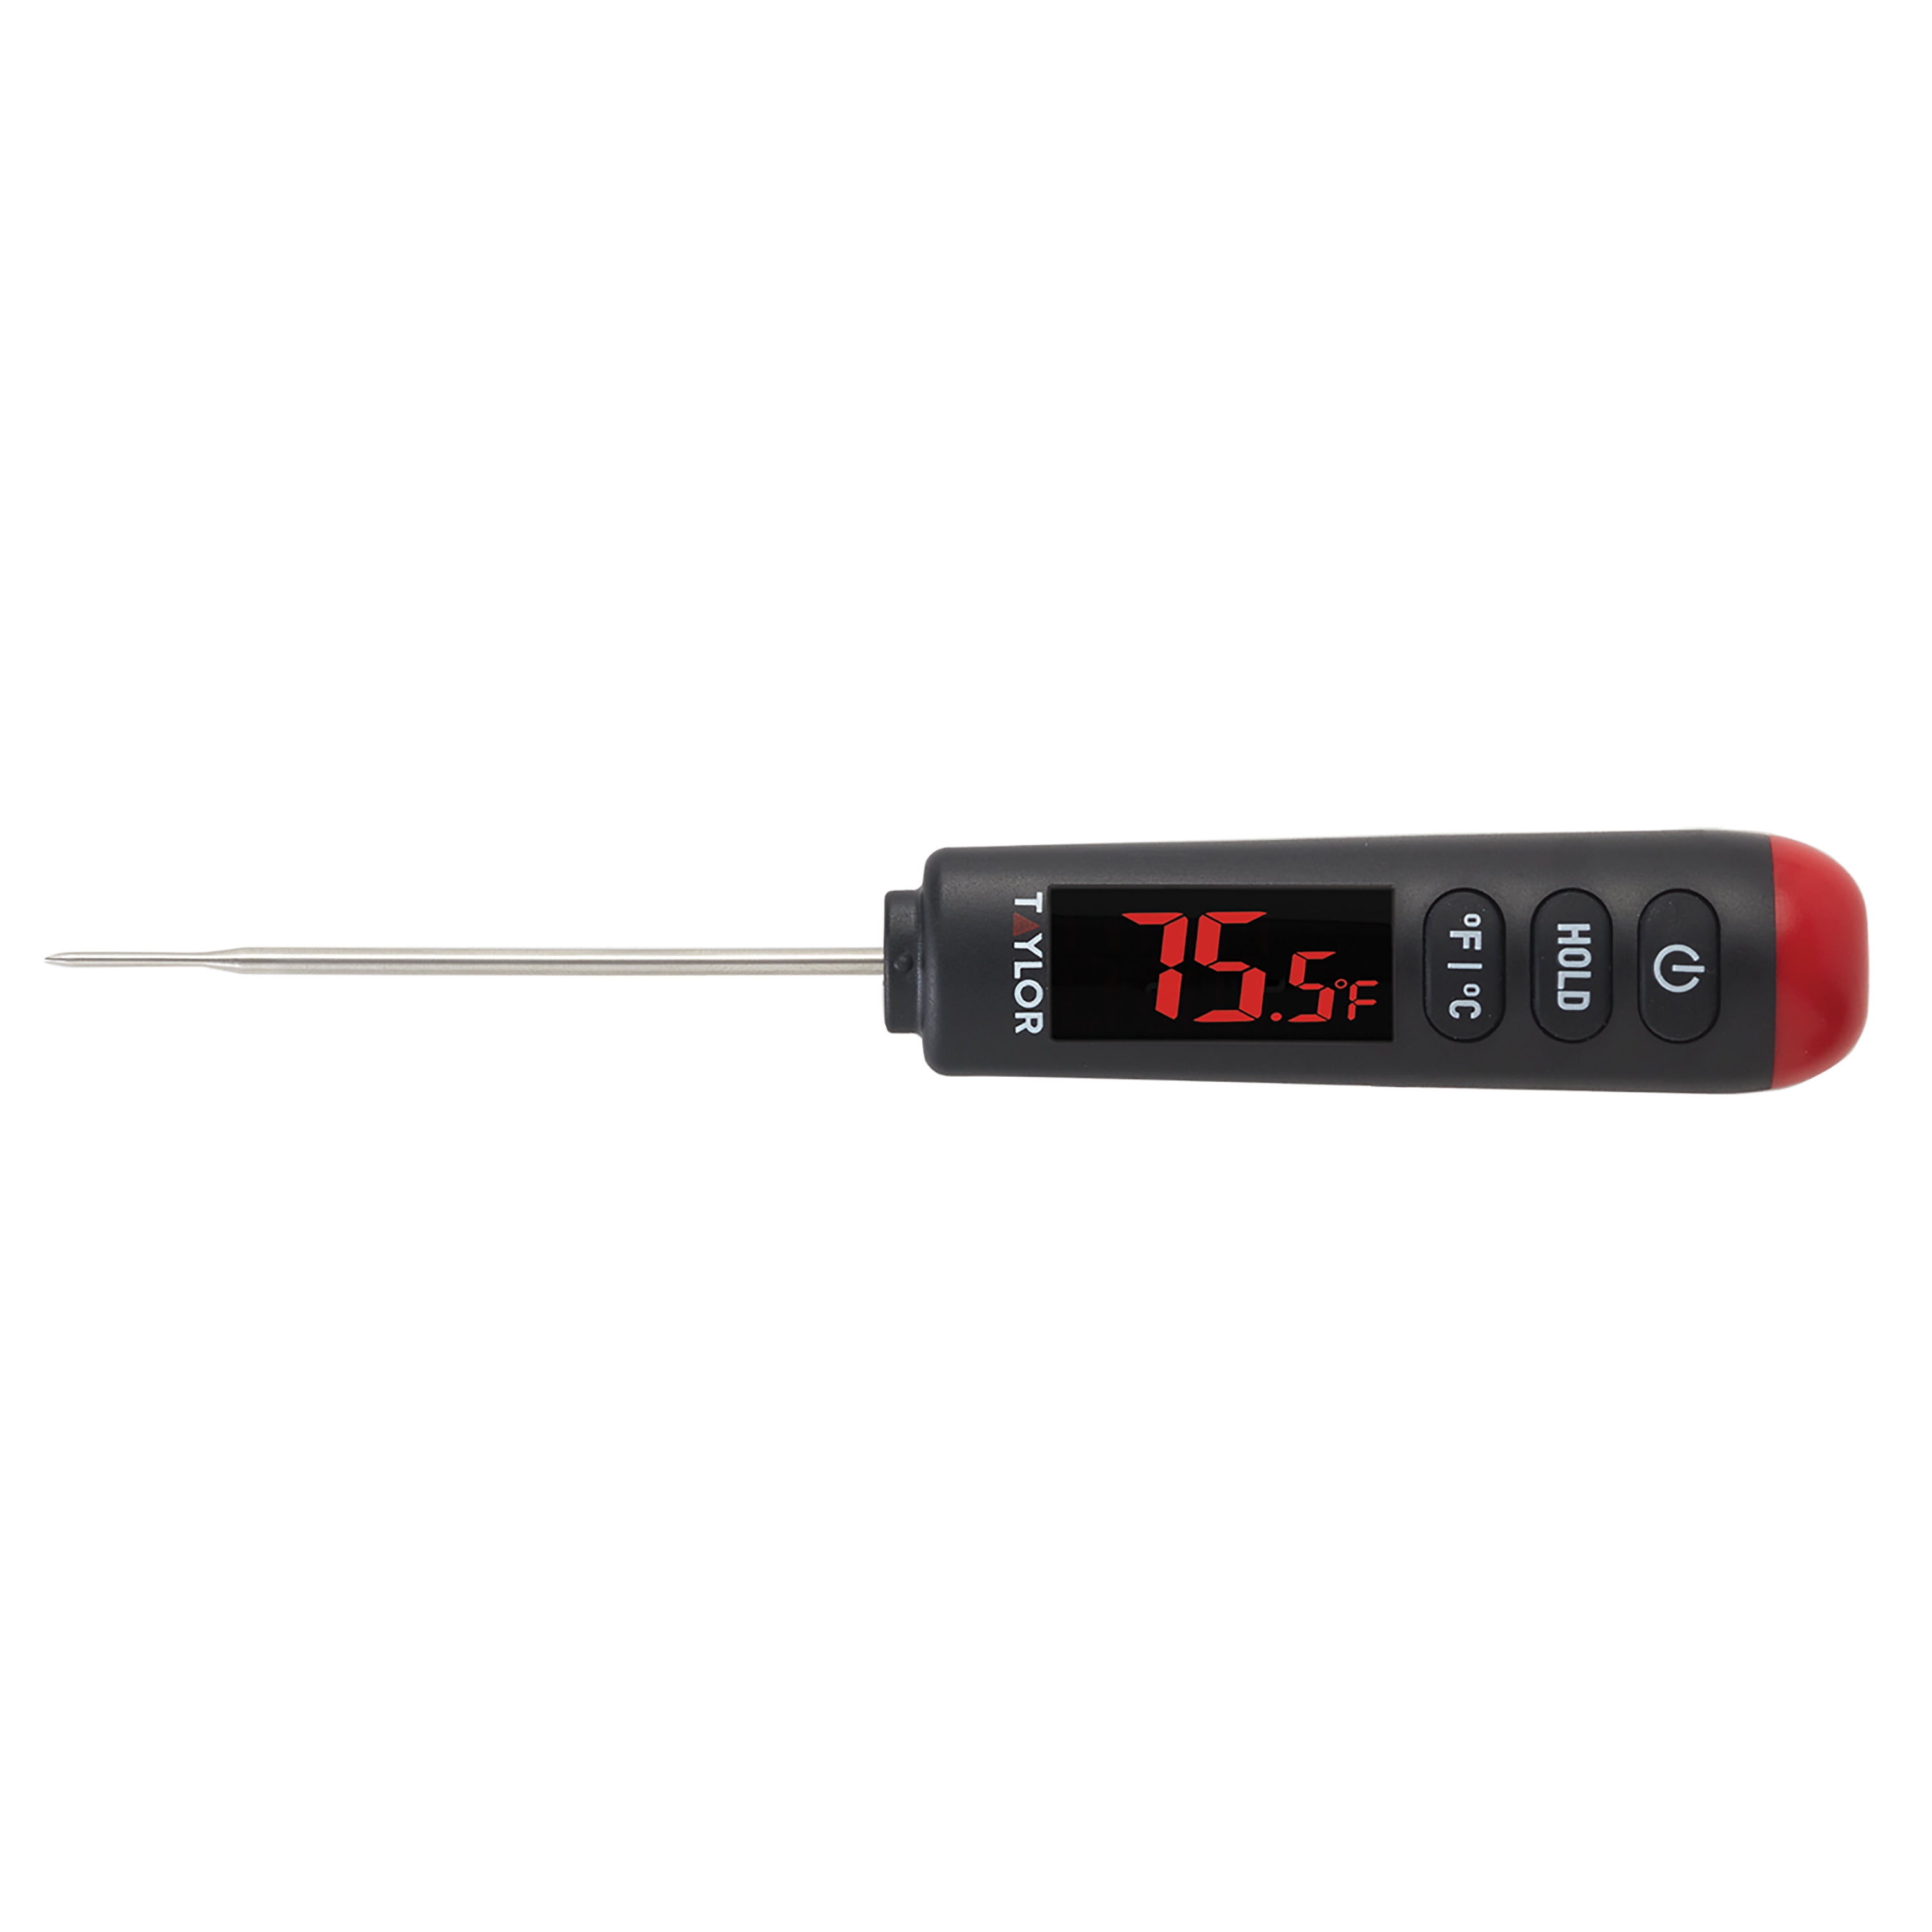 Taylor Digital LED Meat Thermometer with Bright Display